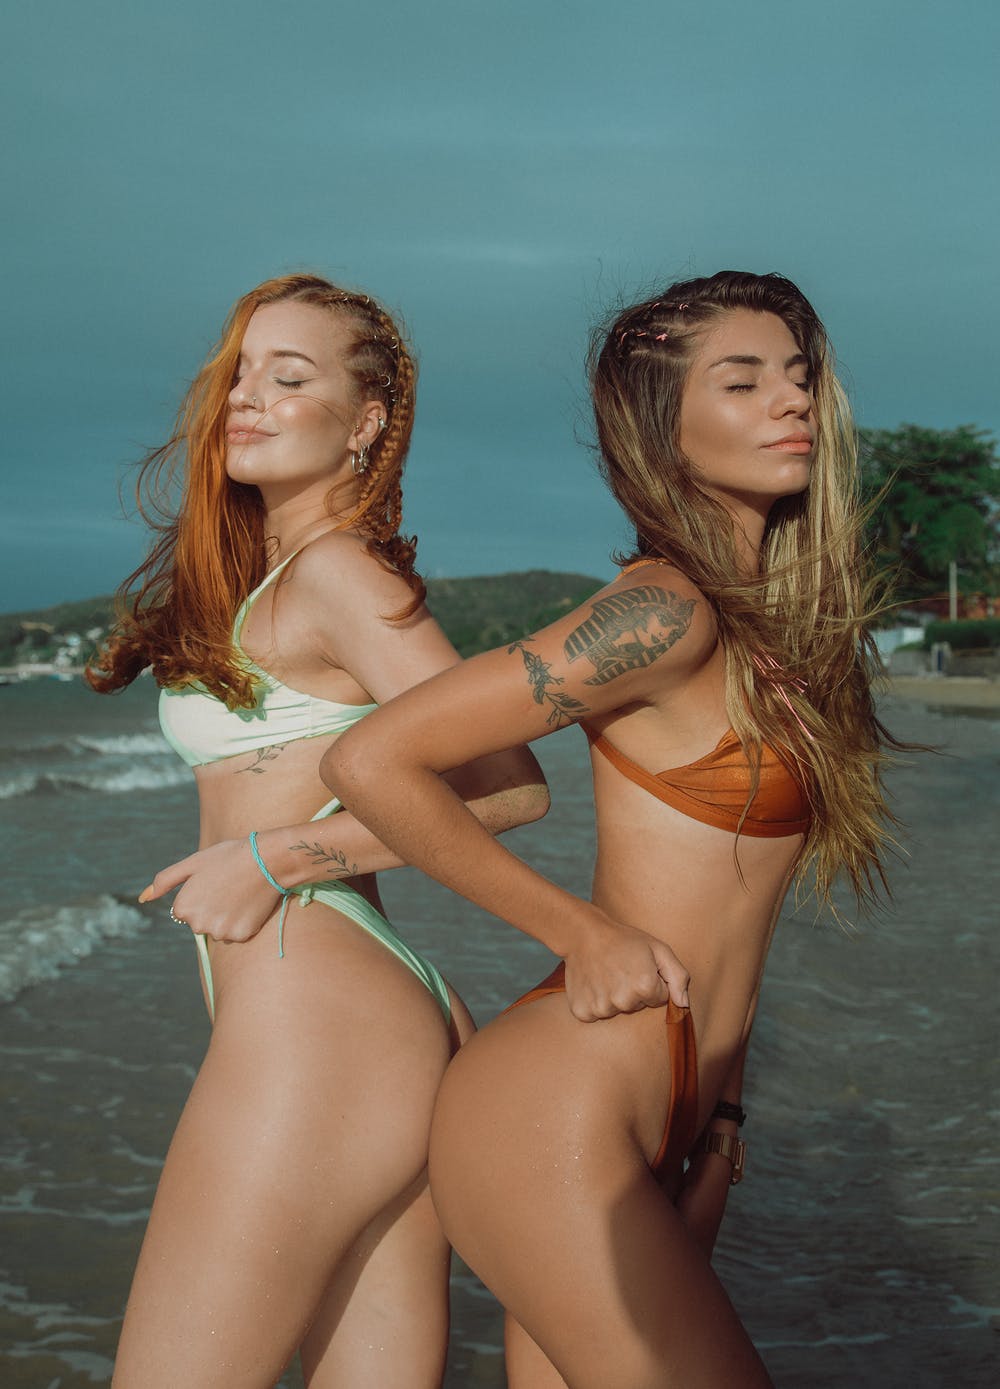 Two women flaunting their thong swimsuit bottoms